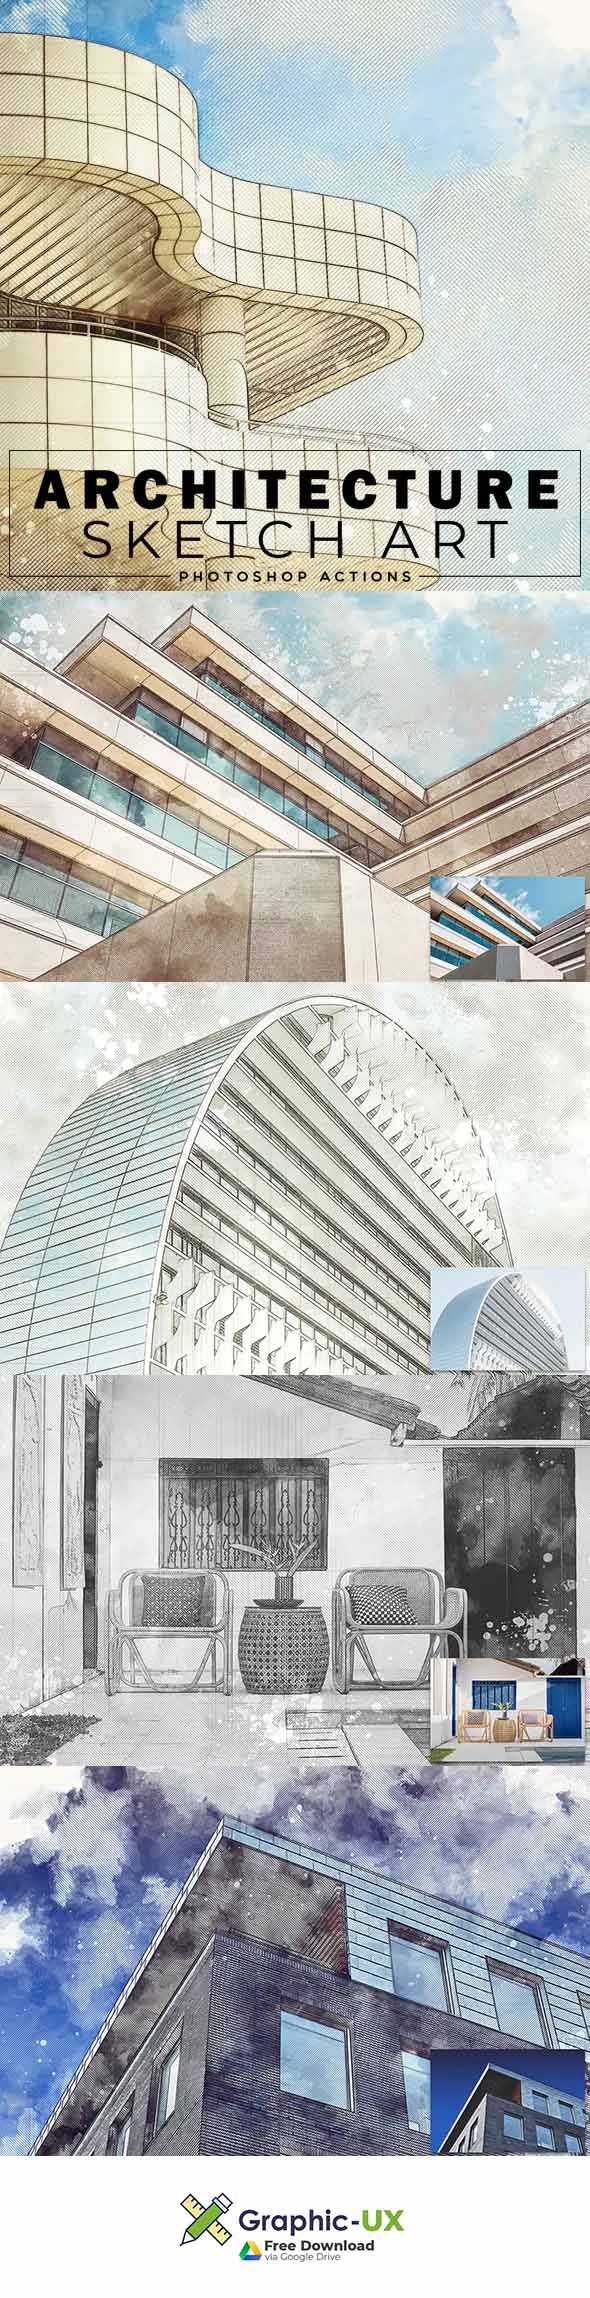 architecture sketch art photoshop action free download